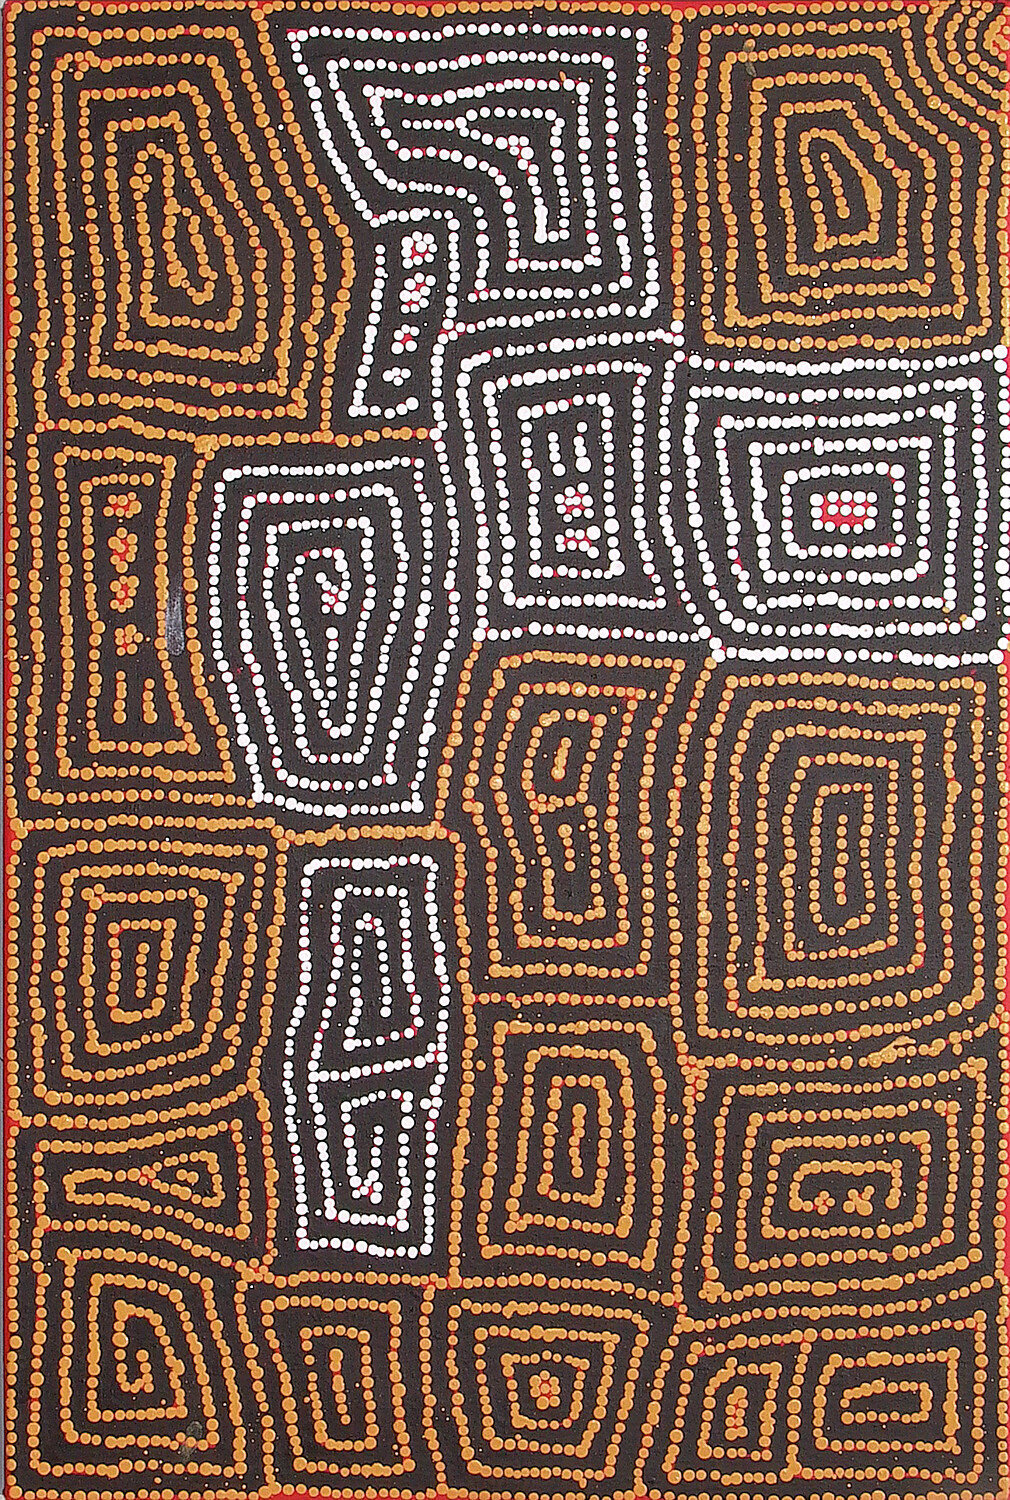 Malliera Initiation Ceremonies (2006) by Barney Campbell Tjakamarra 91x61cm Cat 9495BC